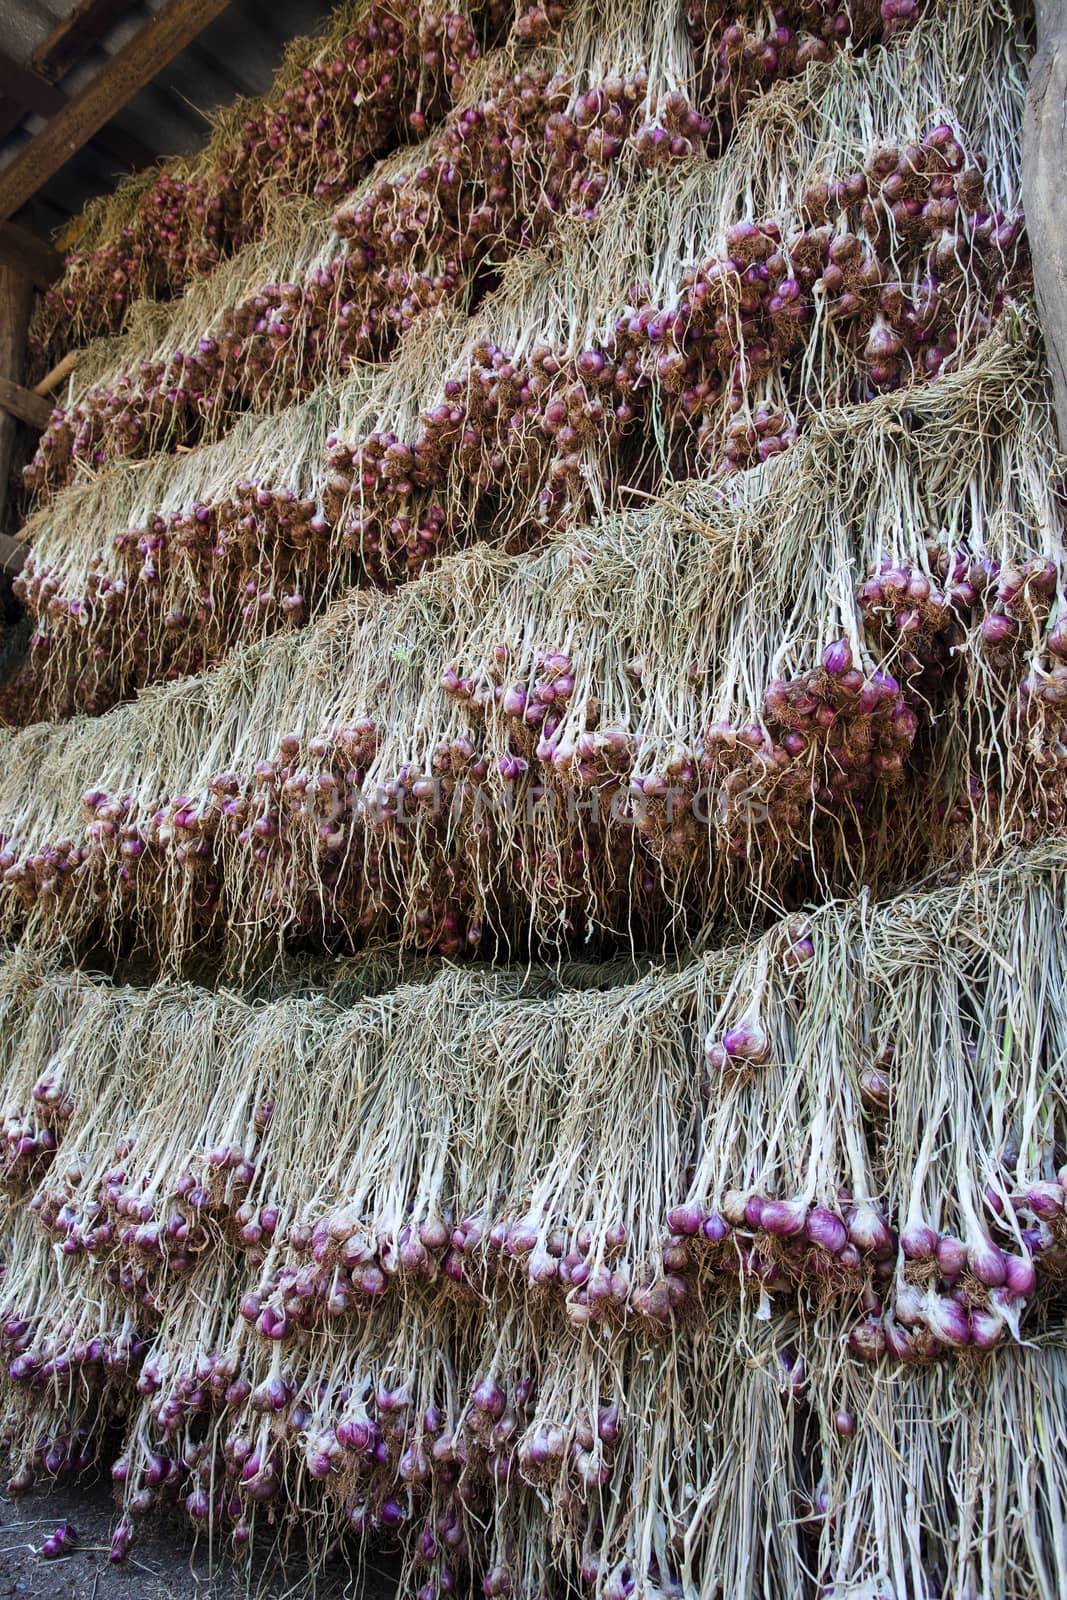 Bunches of onions hanging from the ceiling in a barn